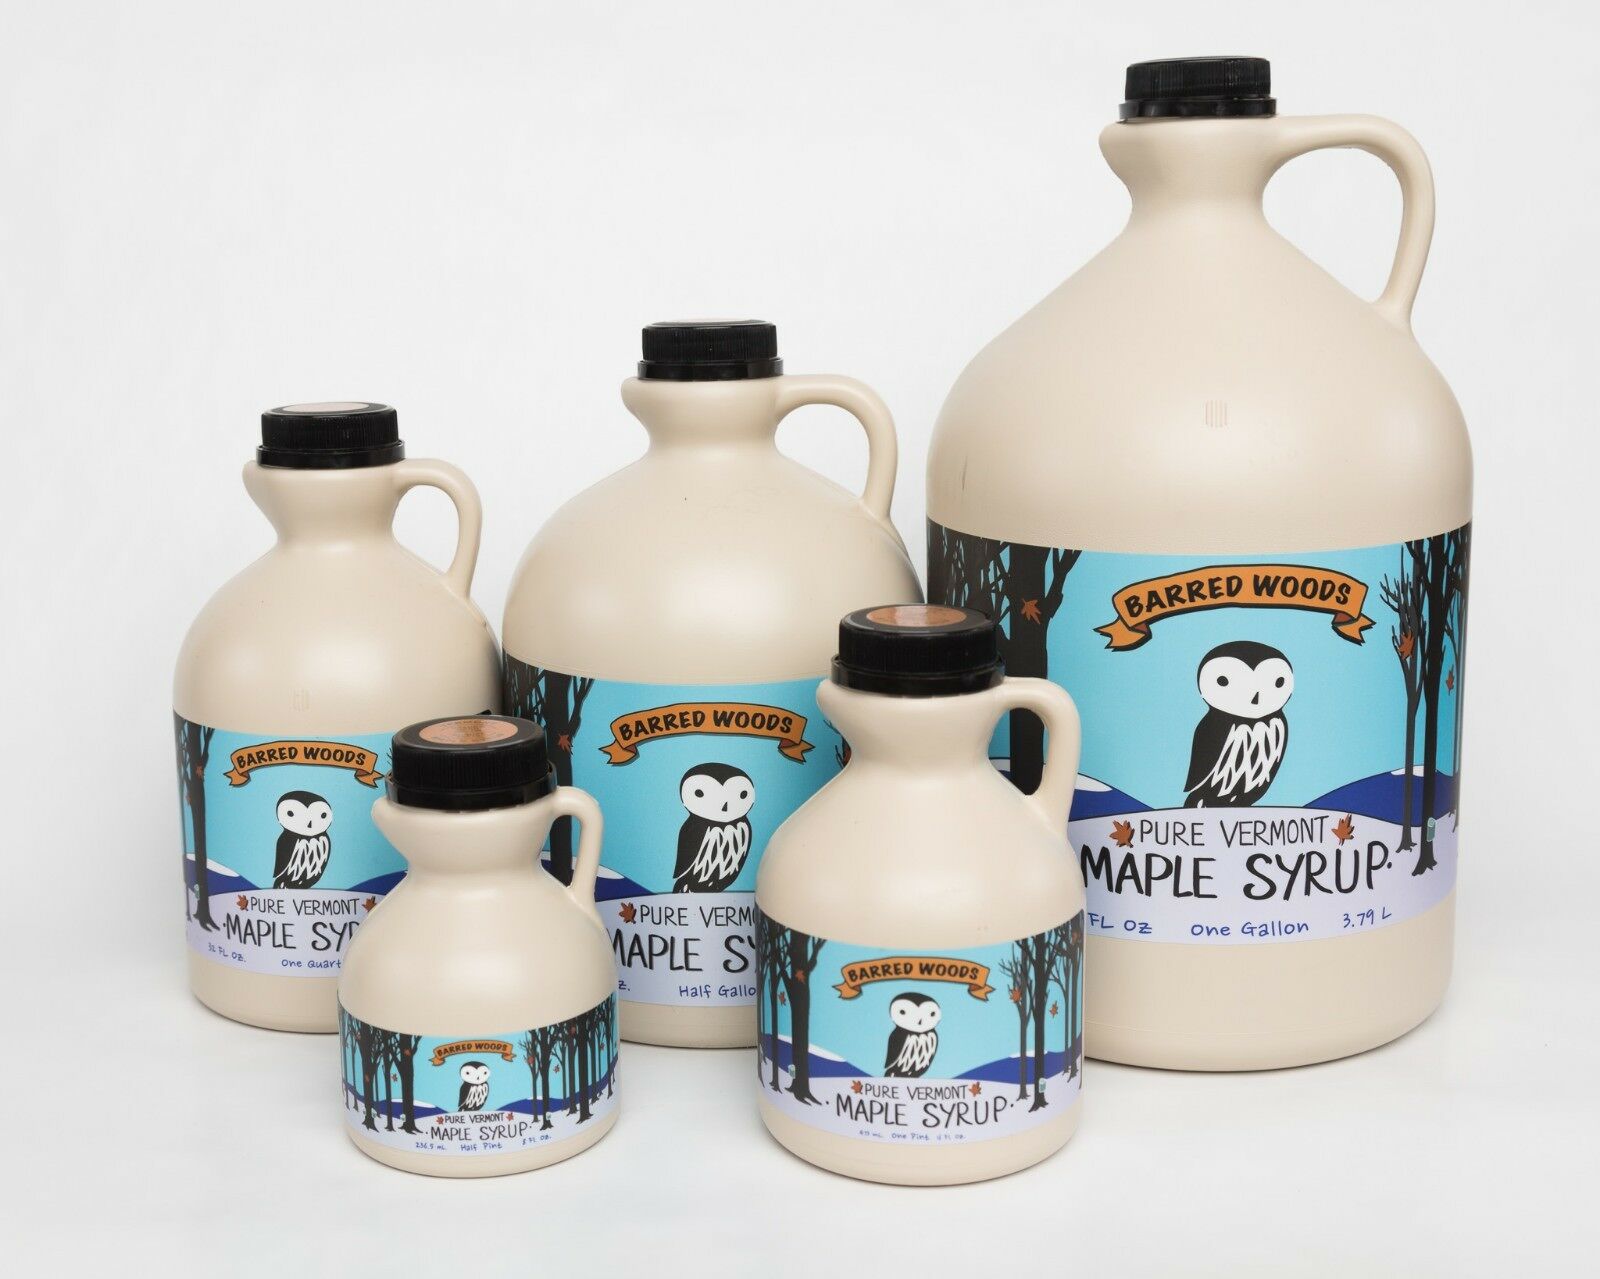 Pure Vermont Maple Syrup - From Barred Woods Maple